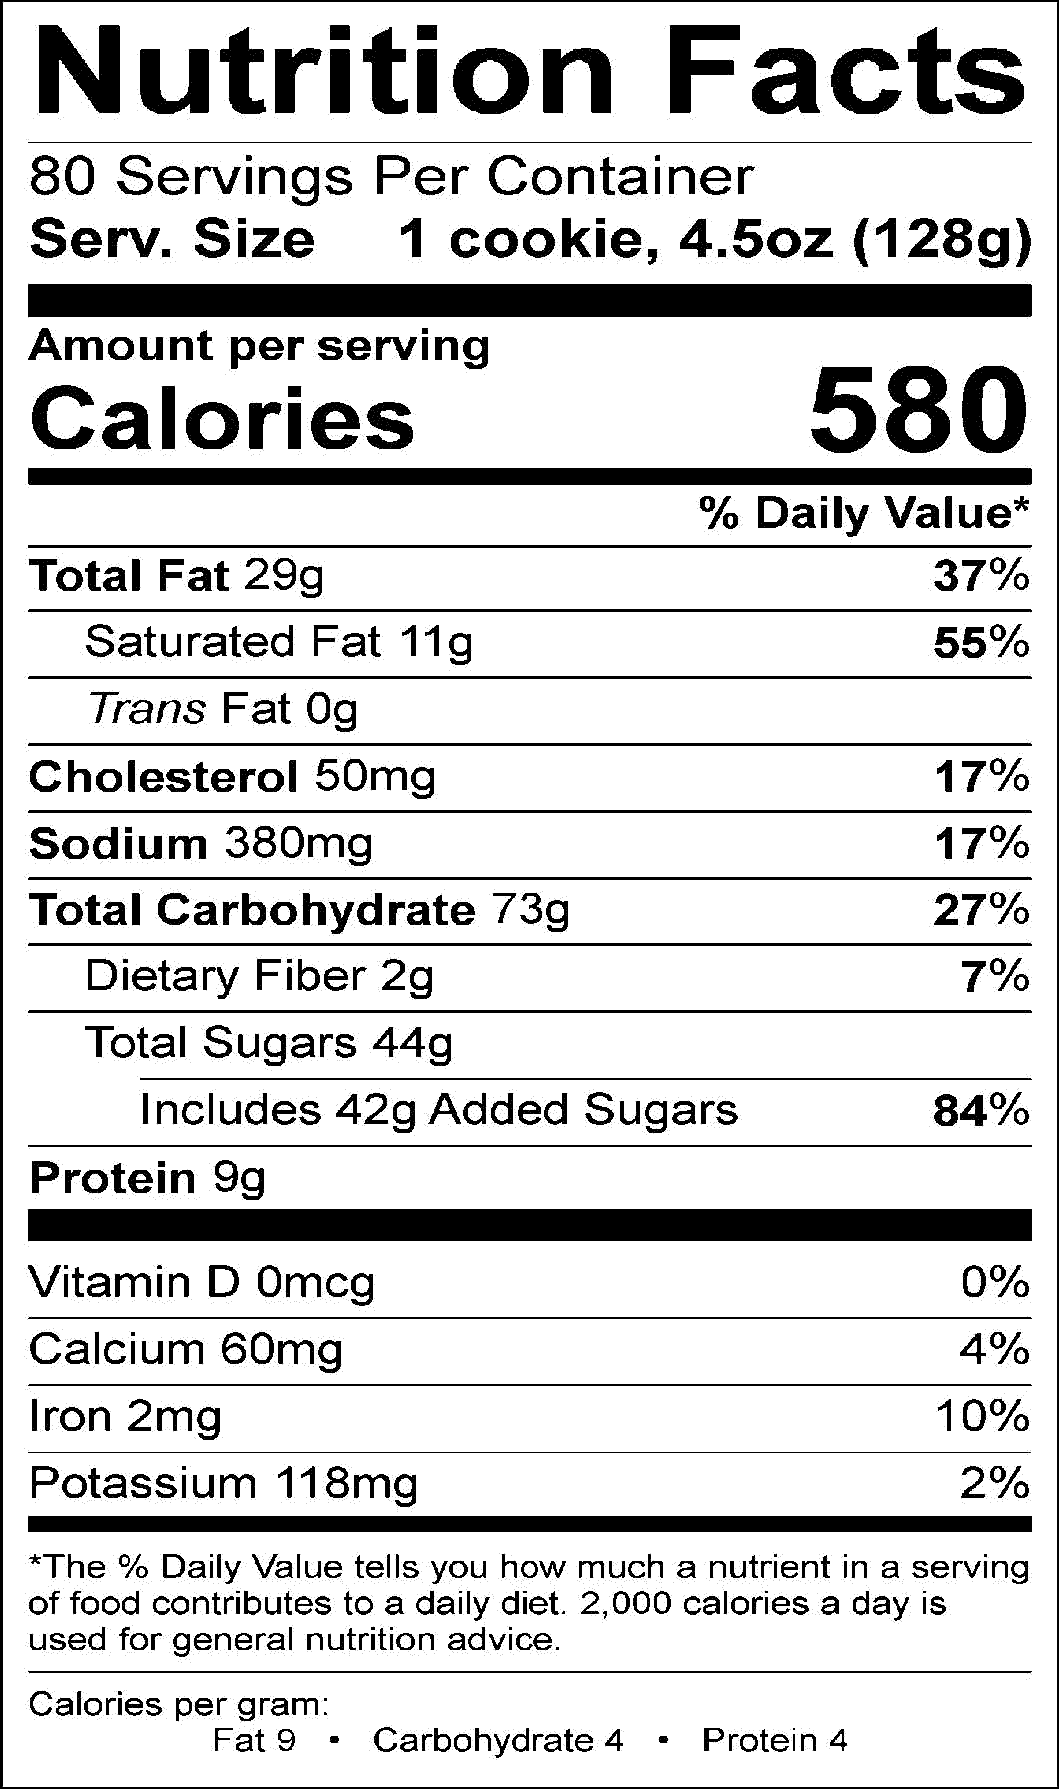 snickers nutrition facts label